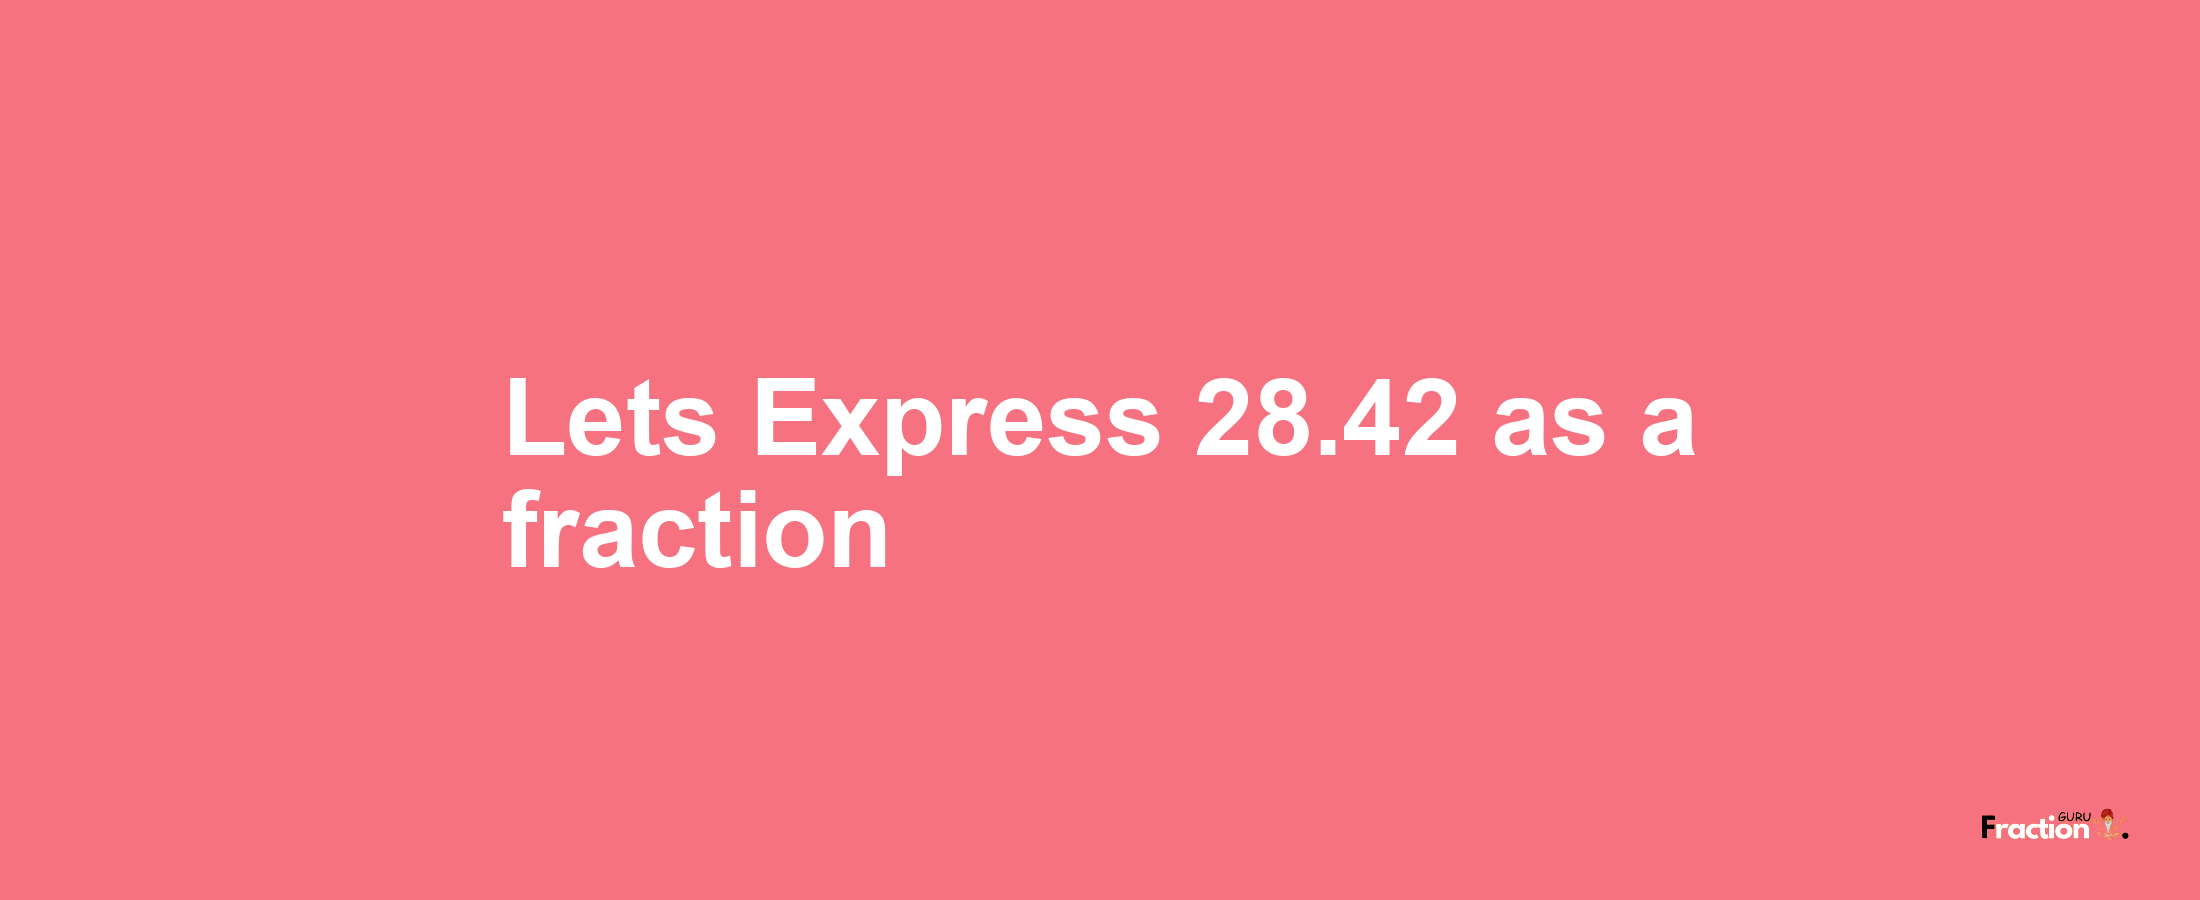 Lets Express 28.42 as afraction